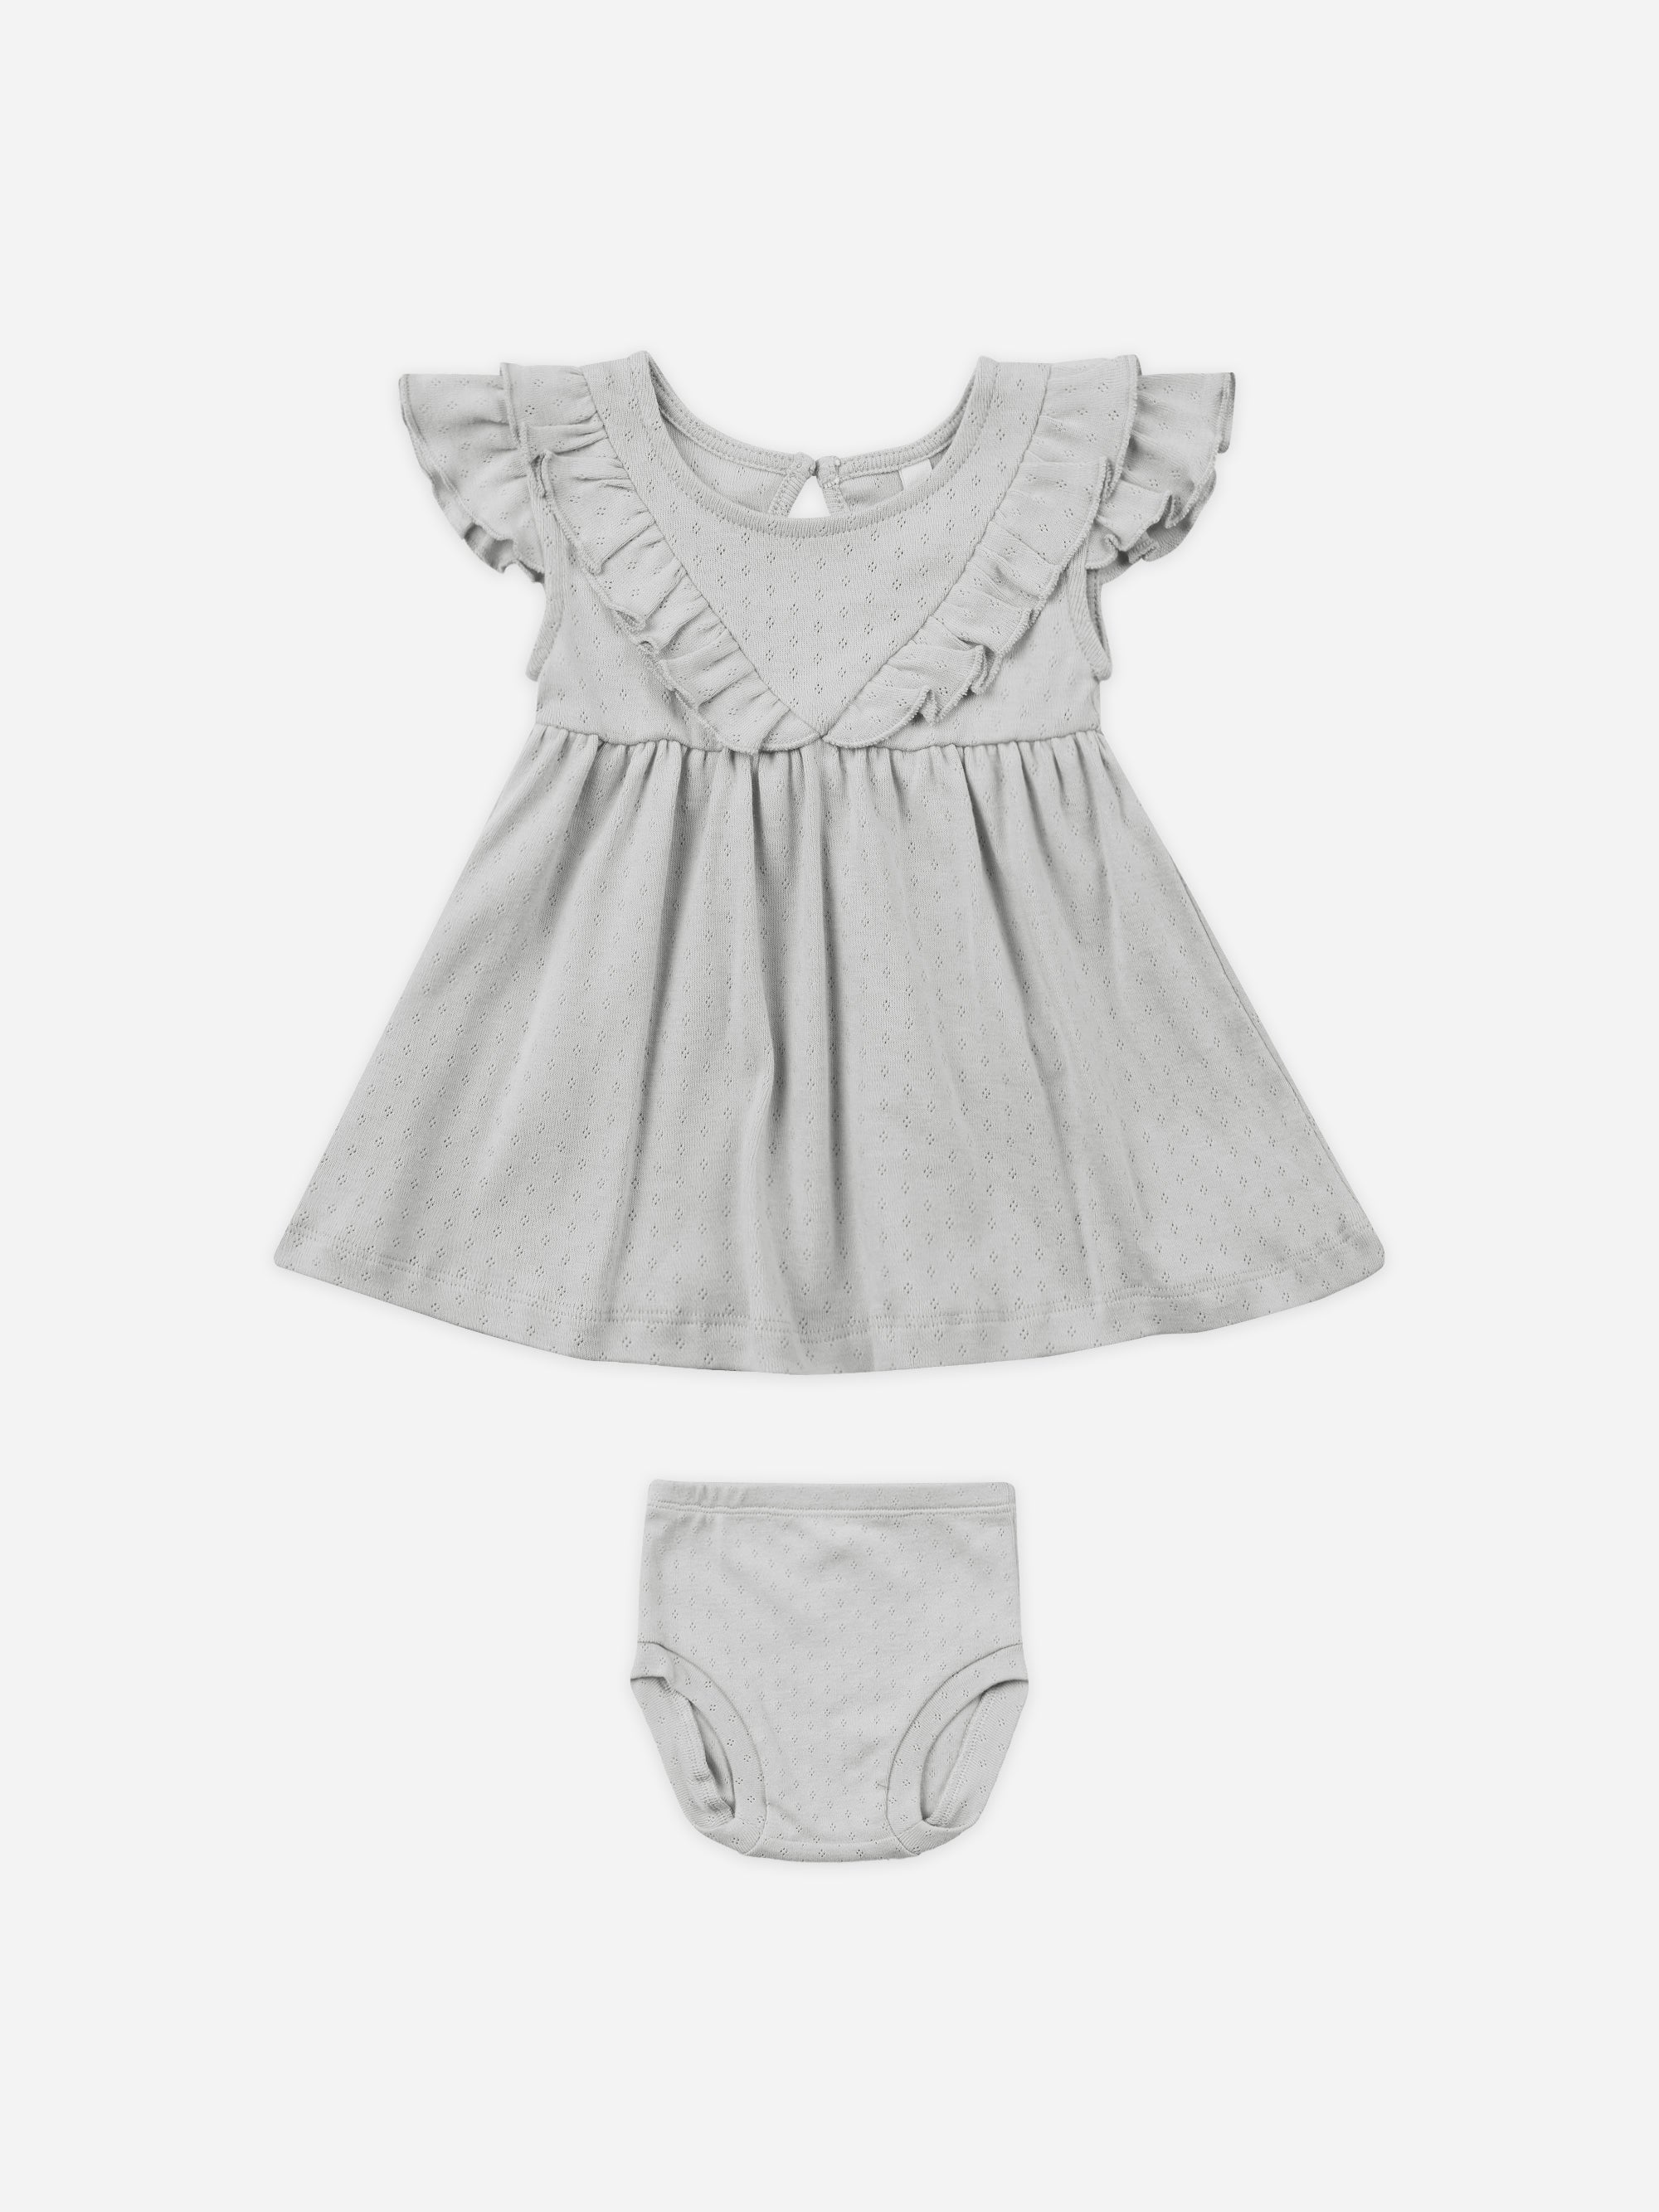 Sleeveless Ruffle V Dress || Cloud - Rylee + Cru | Kids Clothes | Trendy Baby Clothes | Modern Infant Outfits |